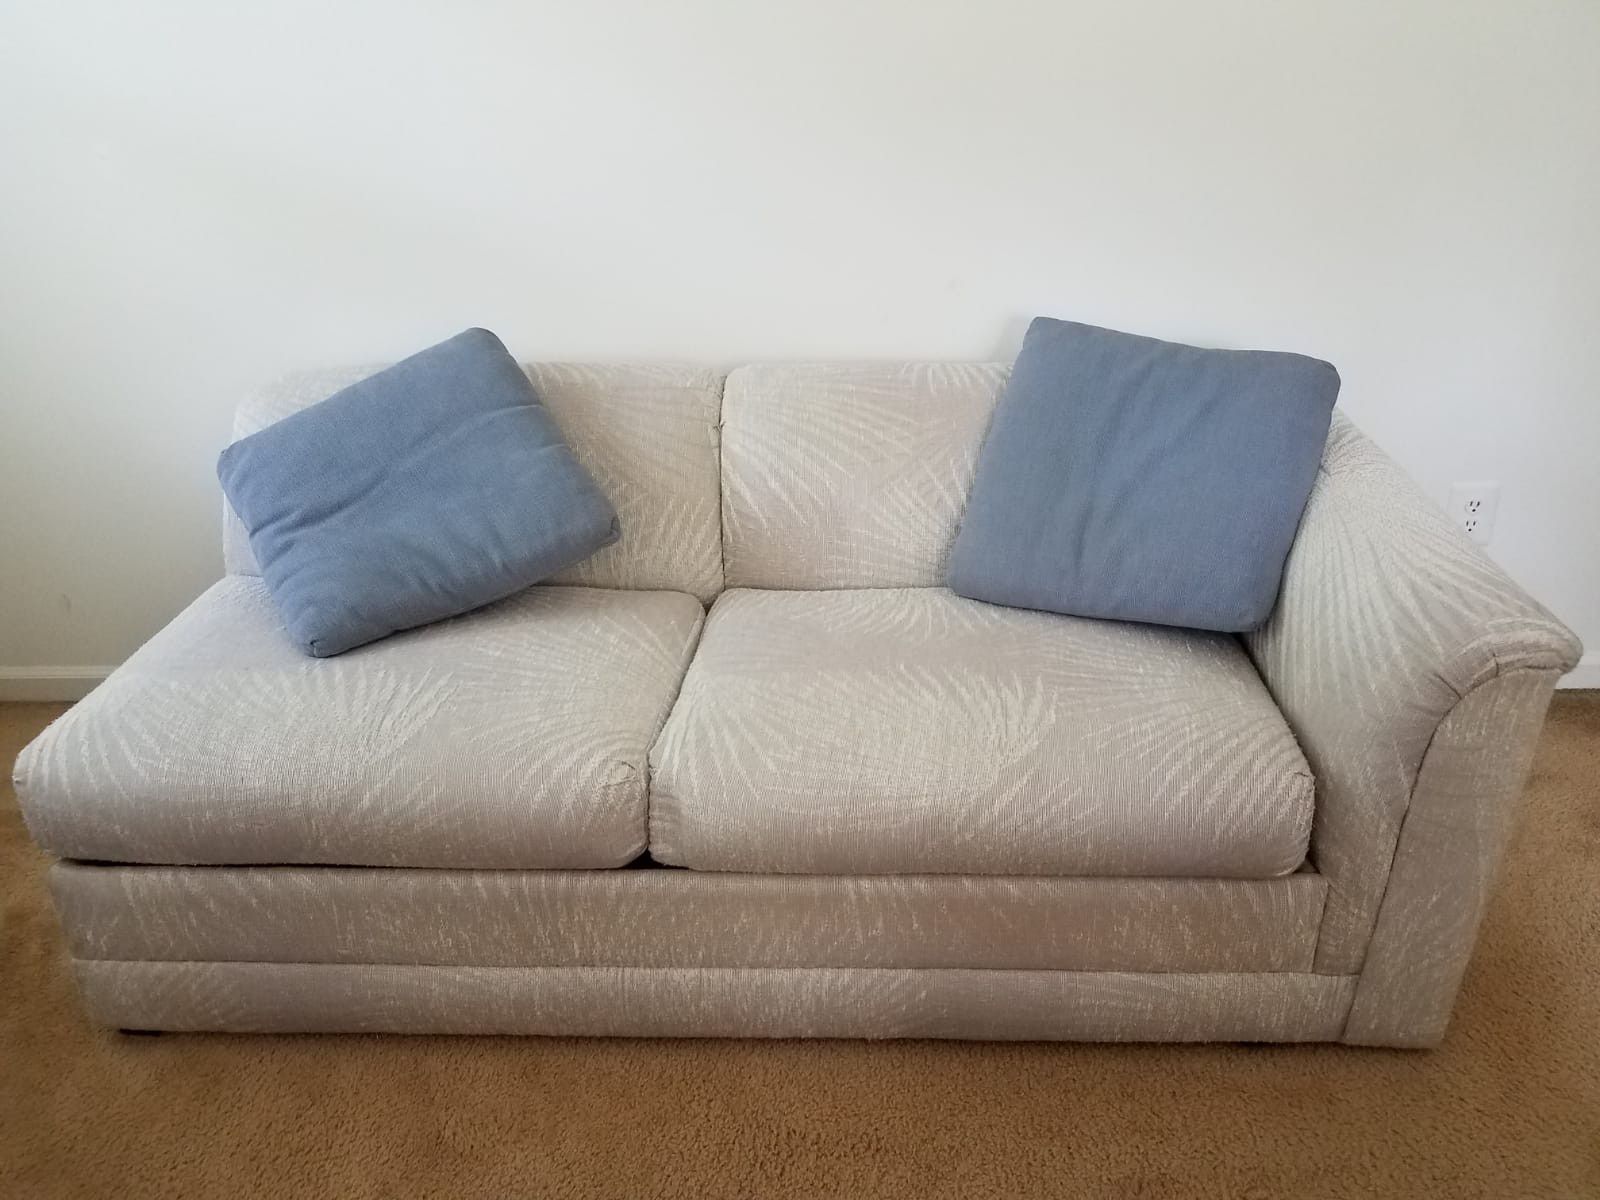 Sectional couch with pullout bed